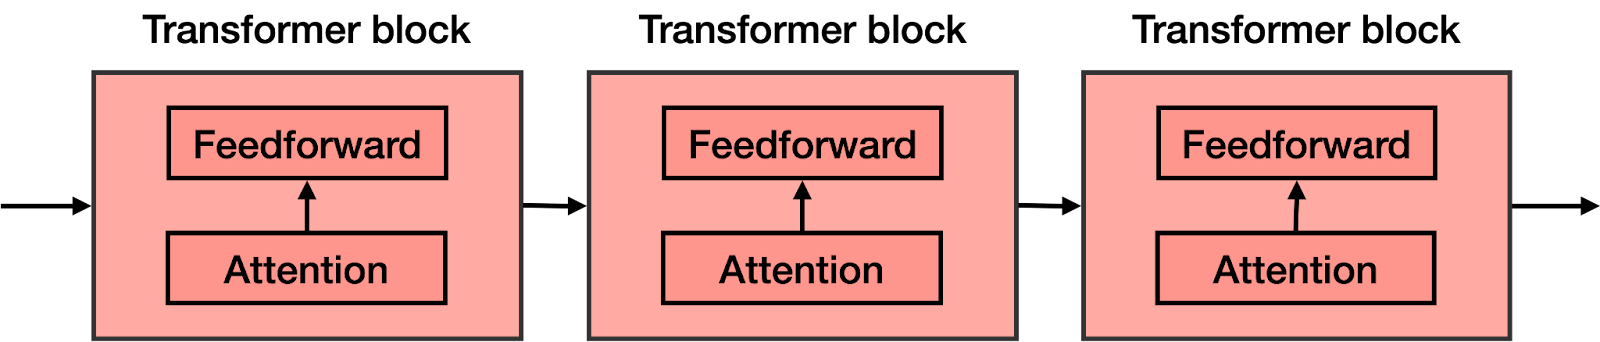 The transformer is a concatenation of many transformer blocks. Each one of these is composed by an attention component followed by a feedforward component (a neural network)